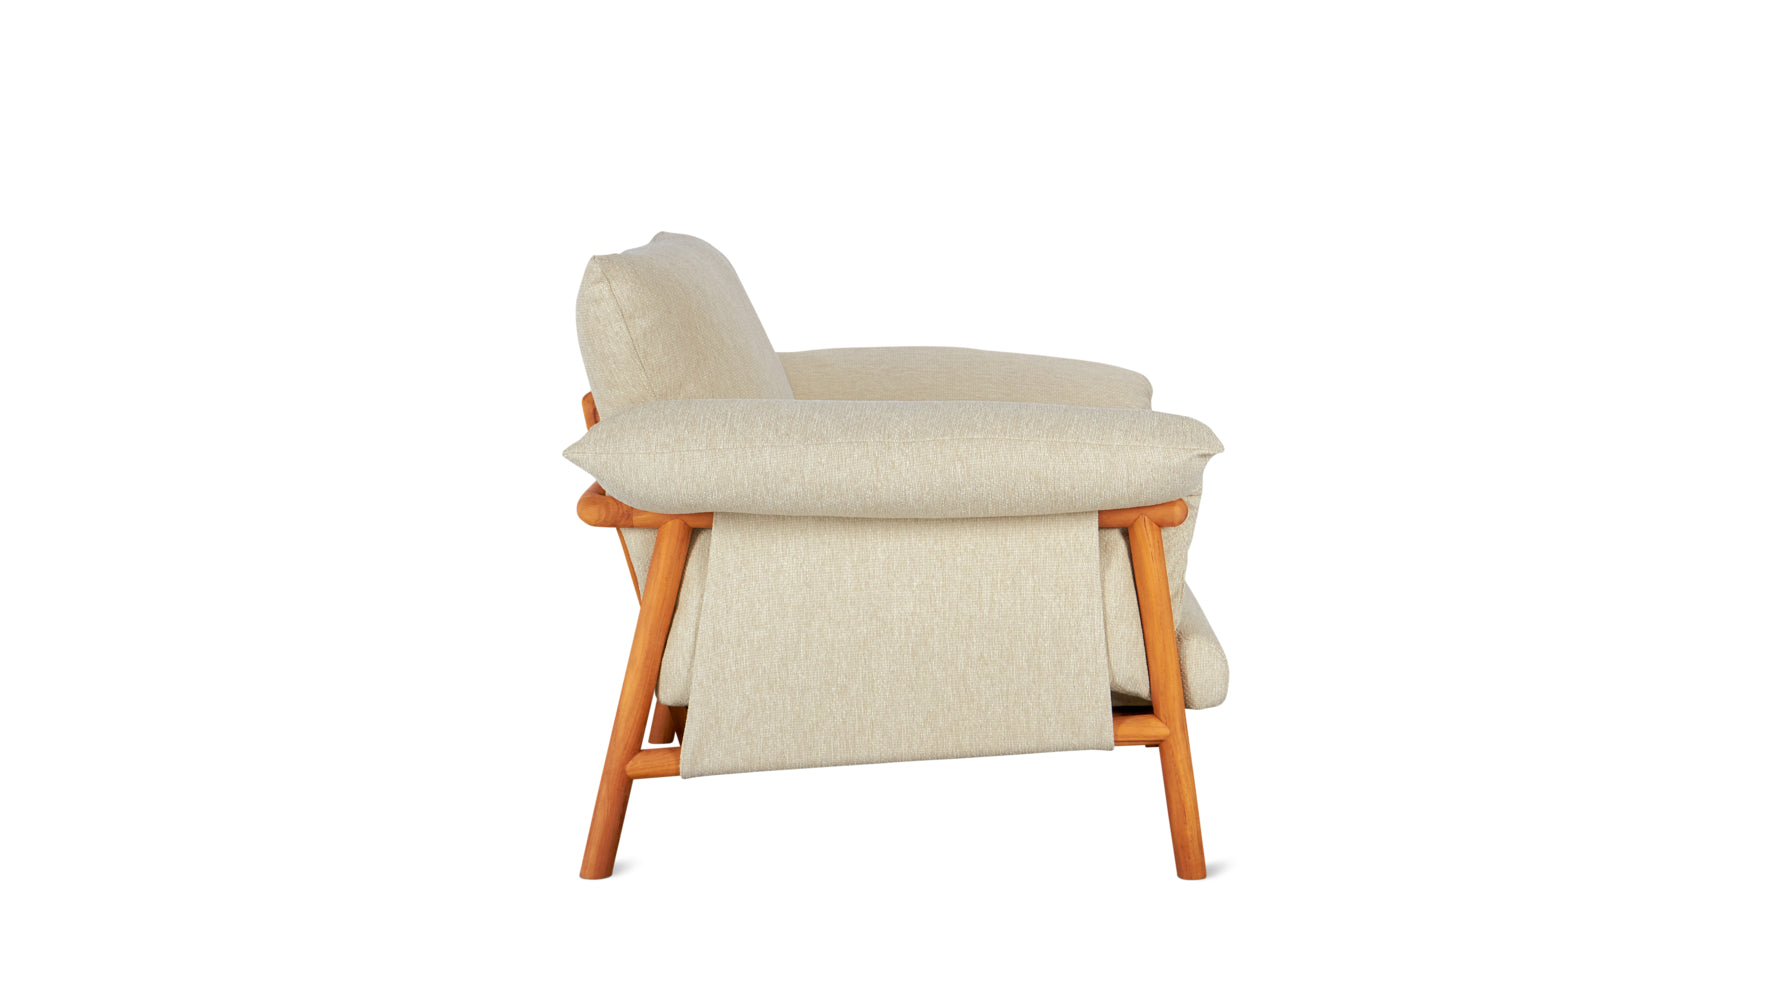 Pillow Talk Outdoor Lounge Chair, Sandy - Image 5